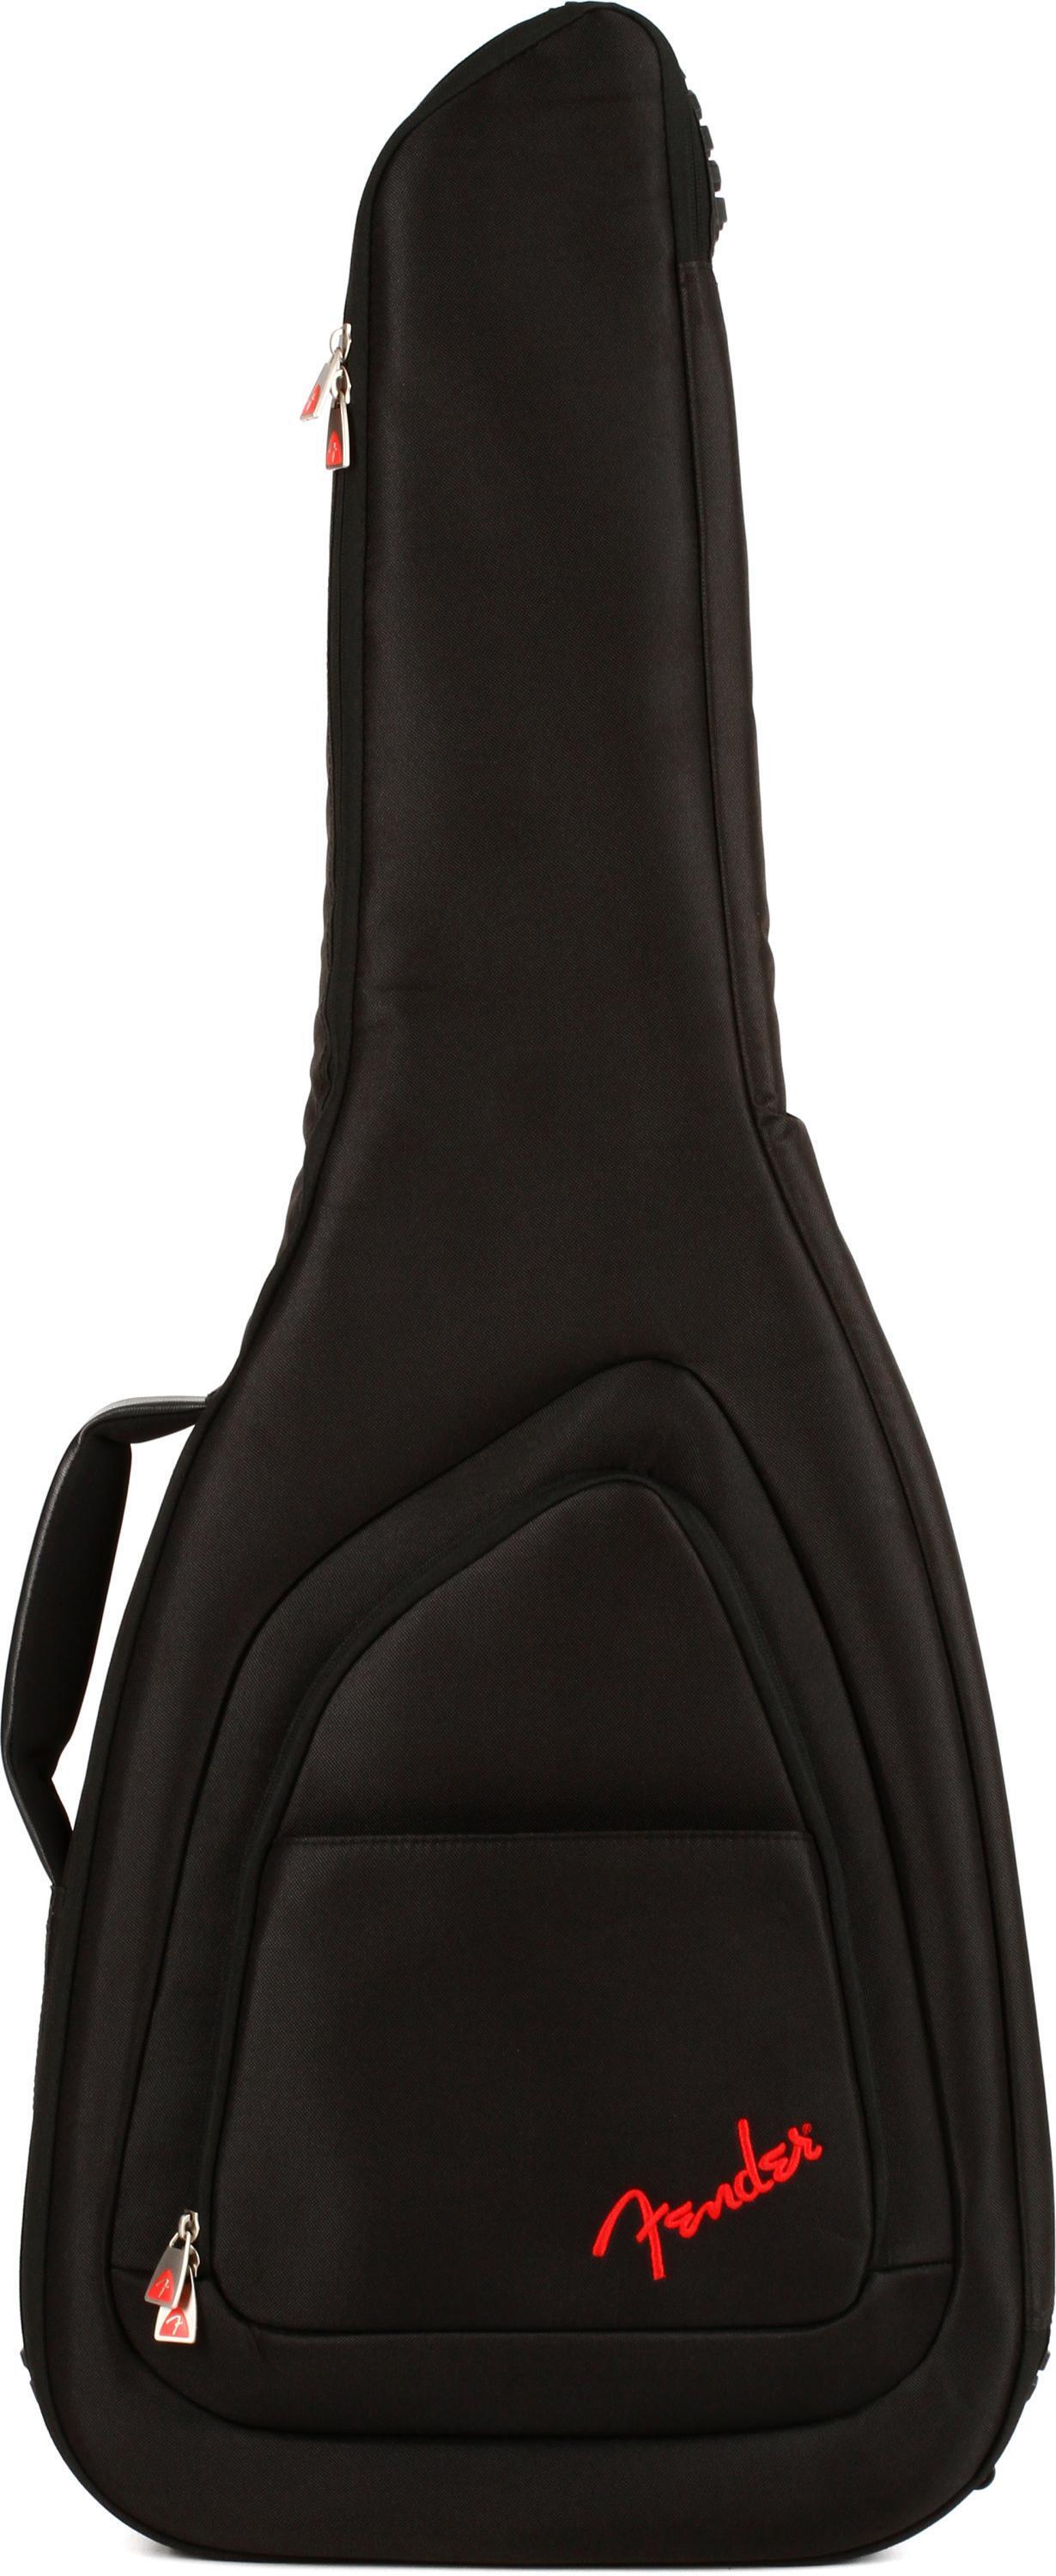 Fender FE620 Electric Guitar Gig Bag Reviews | Sweetwater